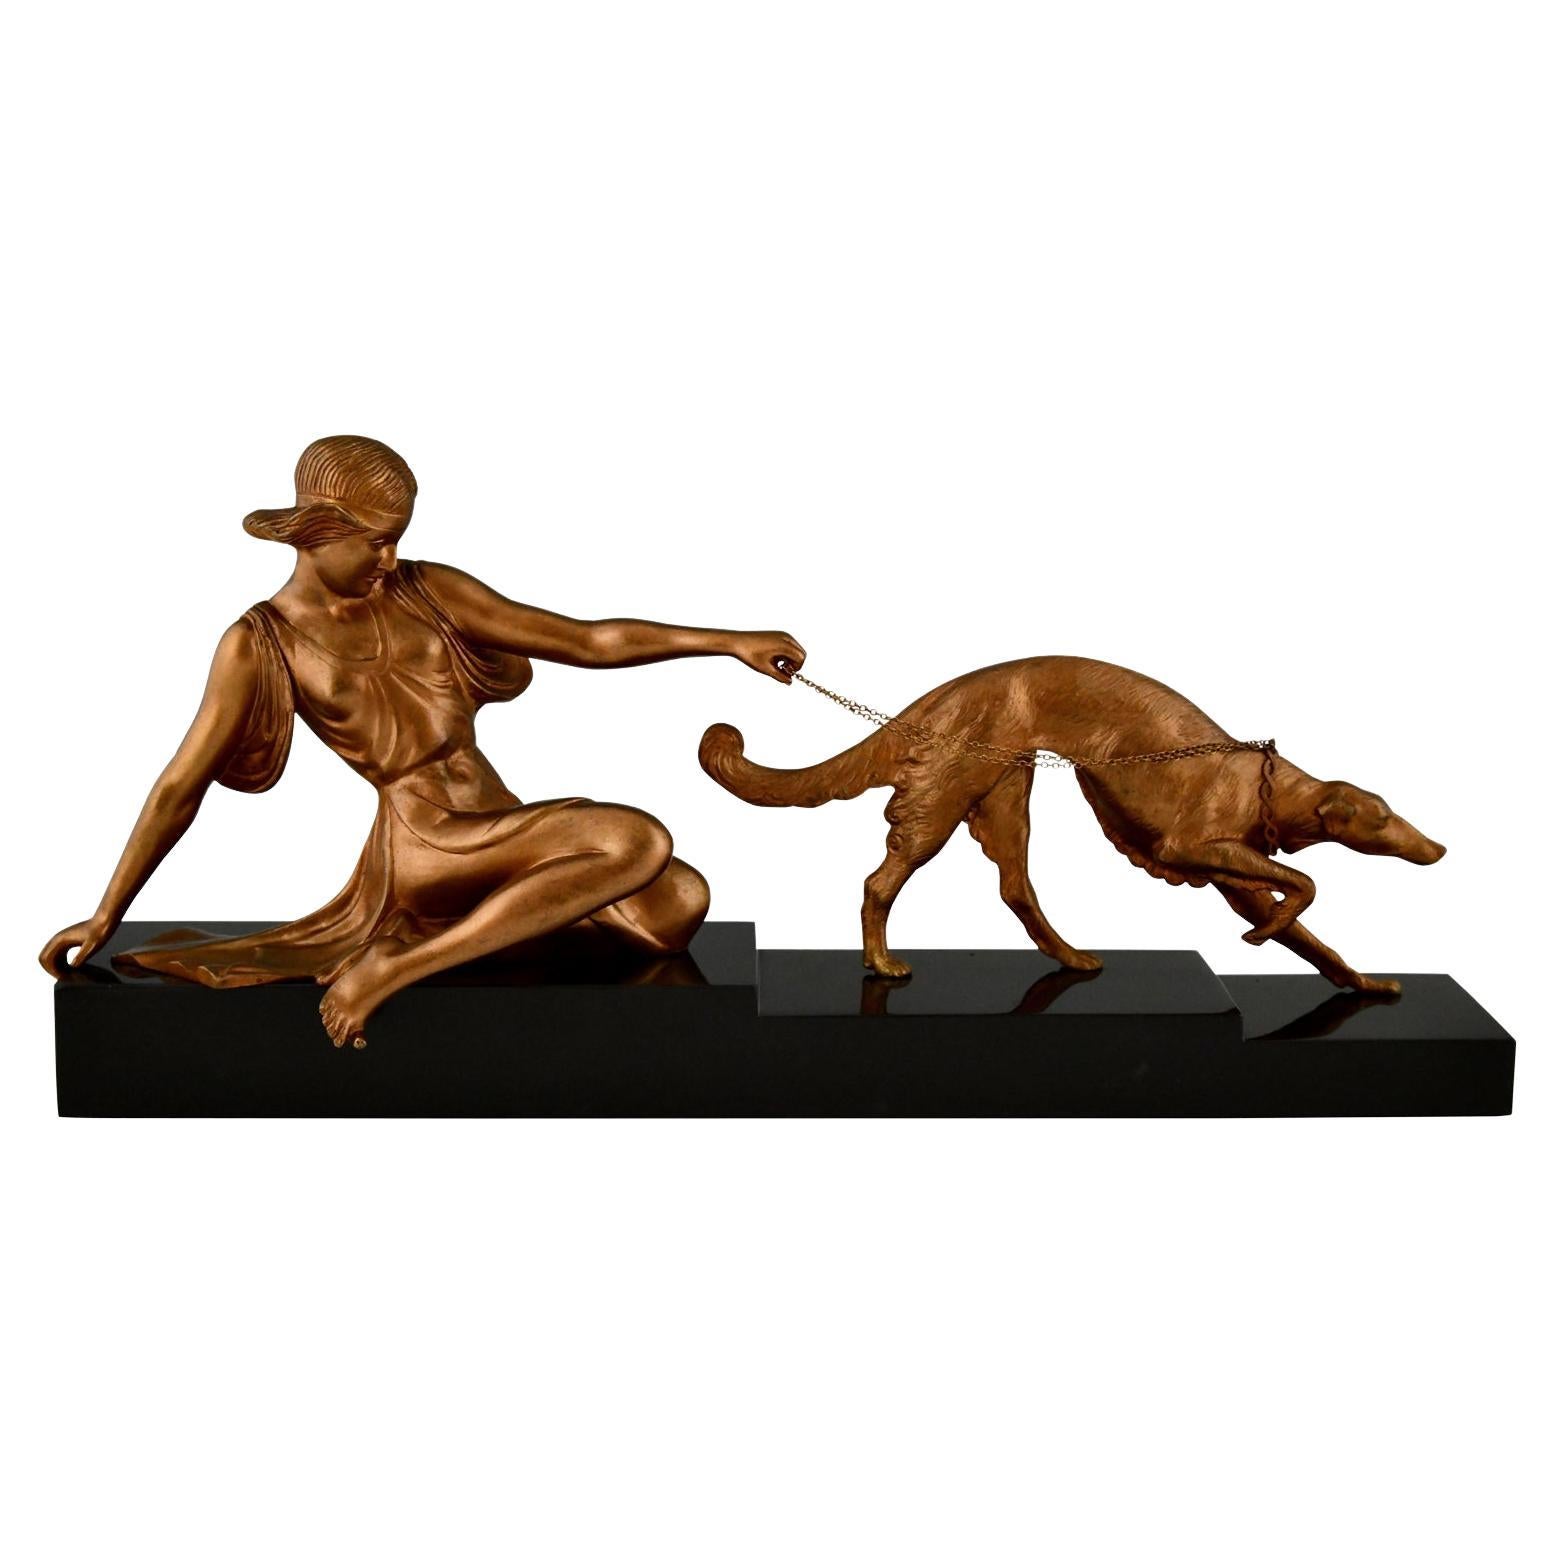 Art Deco Bronze Sculpture Lady with Greyhound Dog by Armand Godard 1930 For Sale